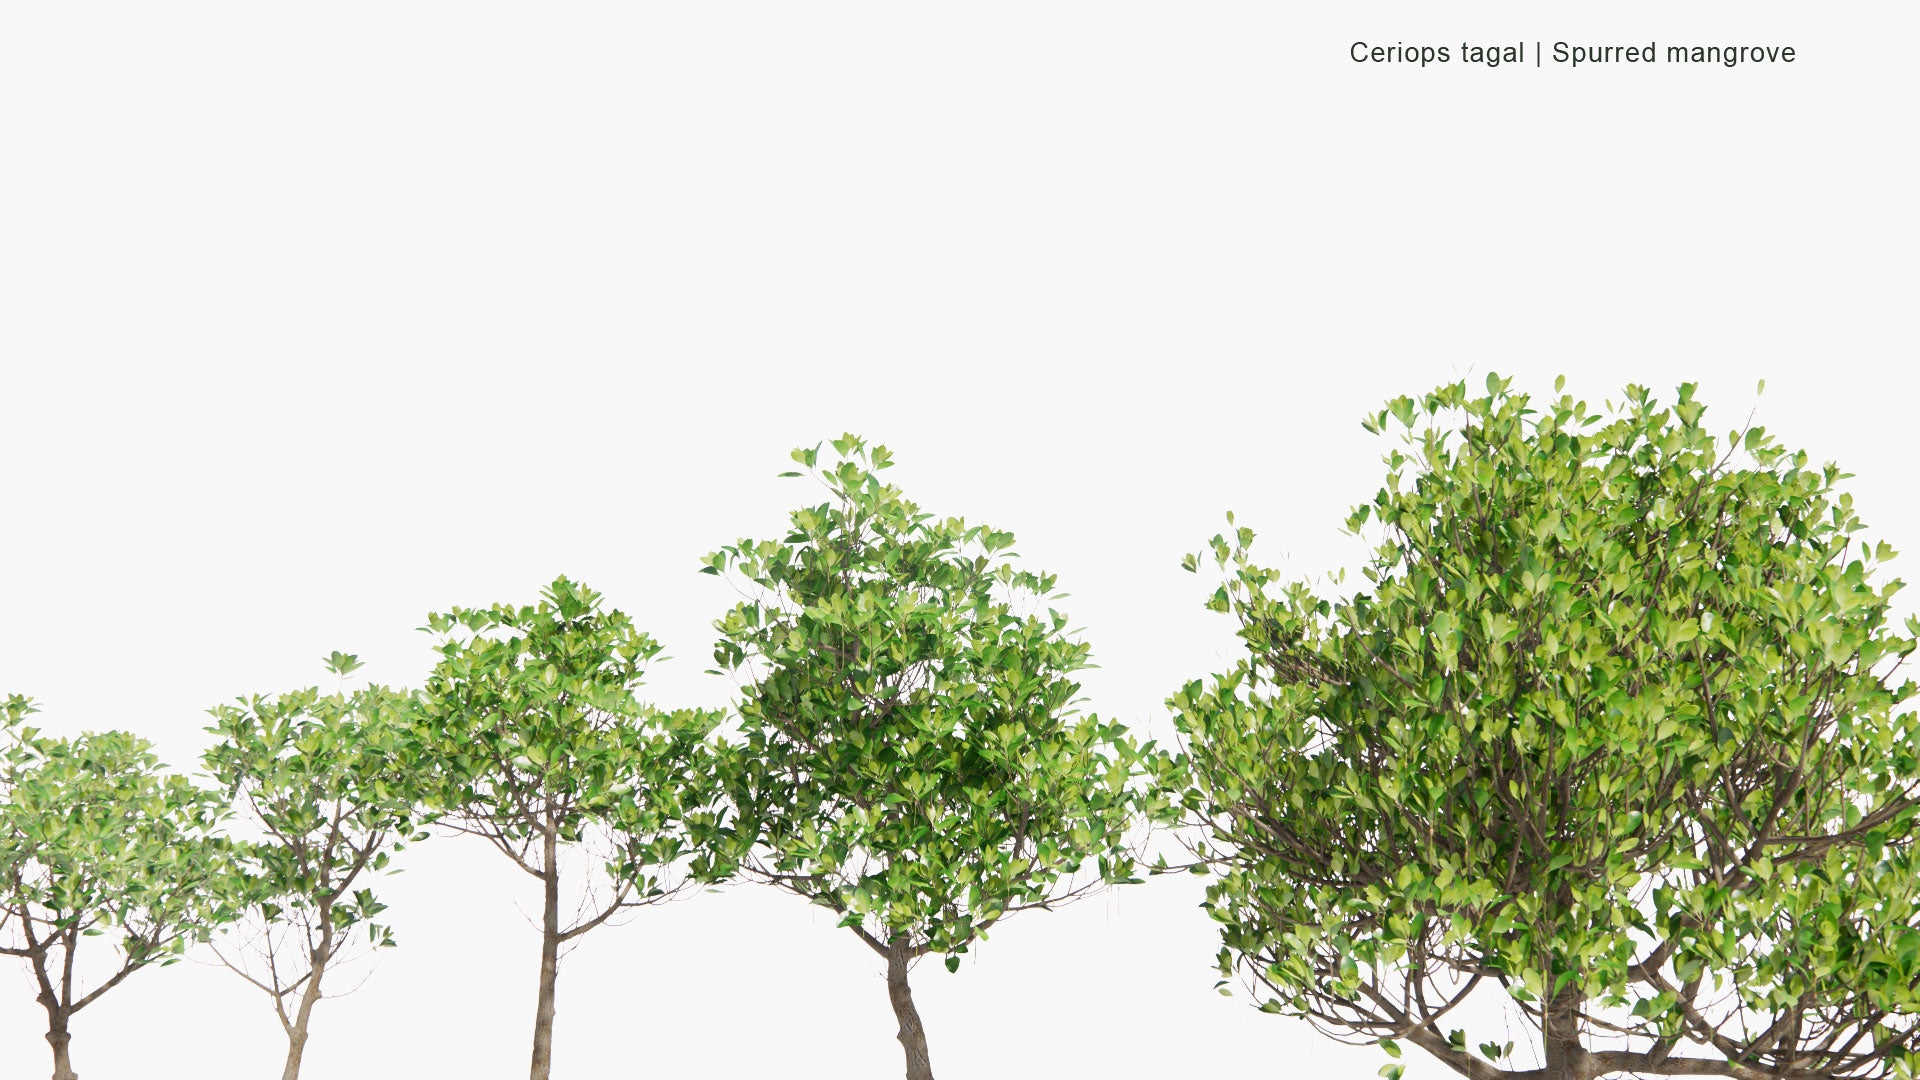 Low Poly Ceriops Tagal - Spurred Mangrove, Indian Mangrove (3D Model)